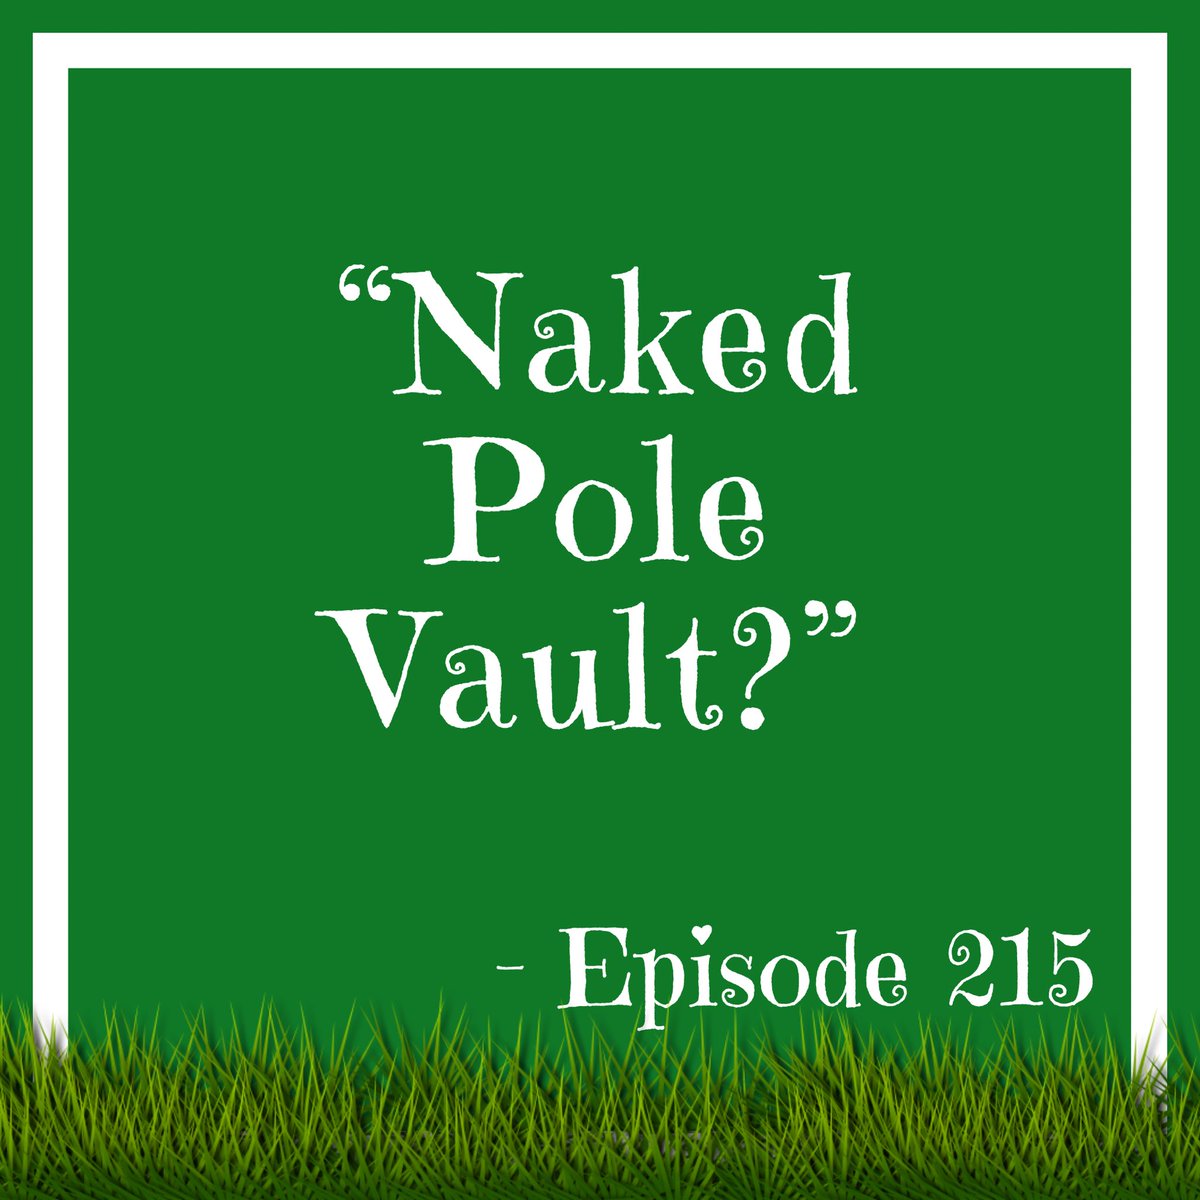 That’s What She Said

#thegreenergrasspodcast #greenergrasspodcast #podcast #offthetonguepodcastnetwork #columbuspodcast #girlswhopodcast #wouldyourather  #prosandcons #pro #con #youtube #spotify #patreon #track #field #trackorfield #thatswhatshesaid #twss #naked #polevault